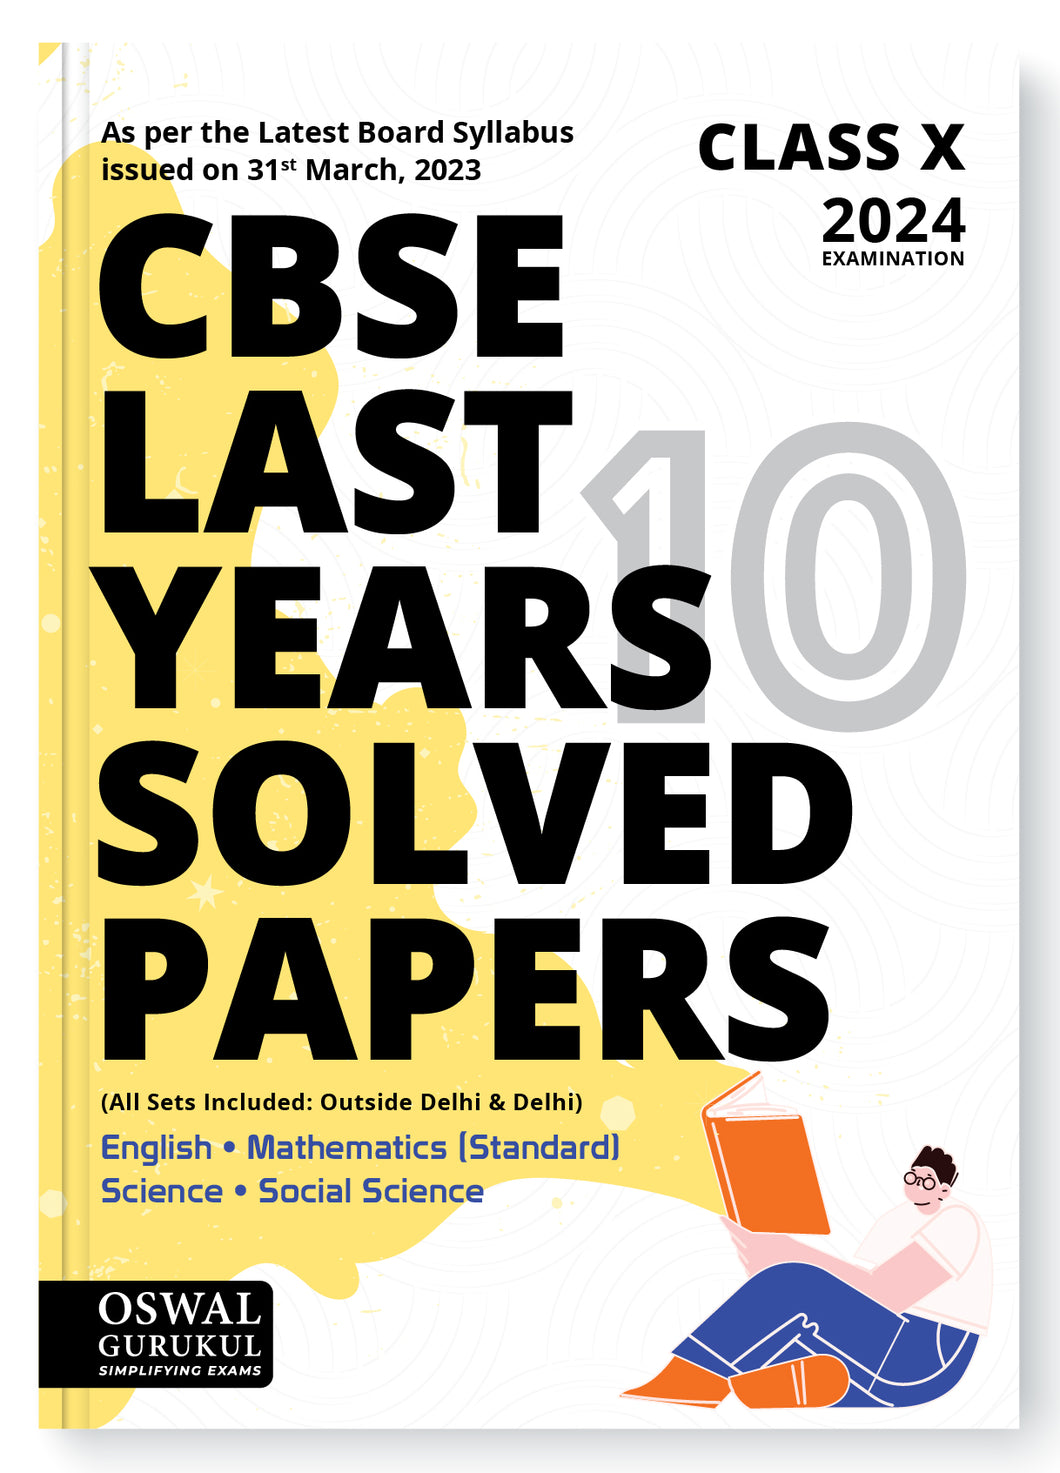 Oswal - Gurukul Last Years 10 Solved Papers for CBSE Class 10 Exam 2024 - Yearwise Board Solutions of Math Standard, English, Science & Social Science (All Sets Delhi & Outside), Latest Syllabus